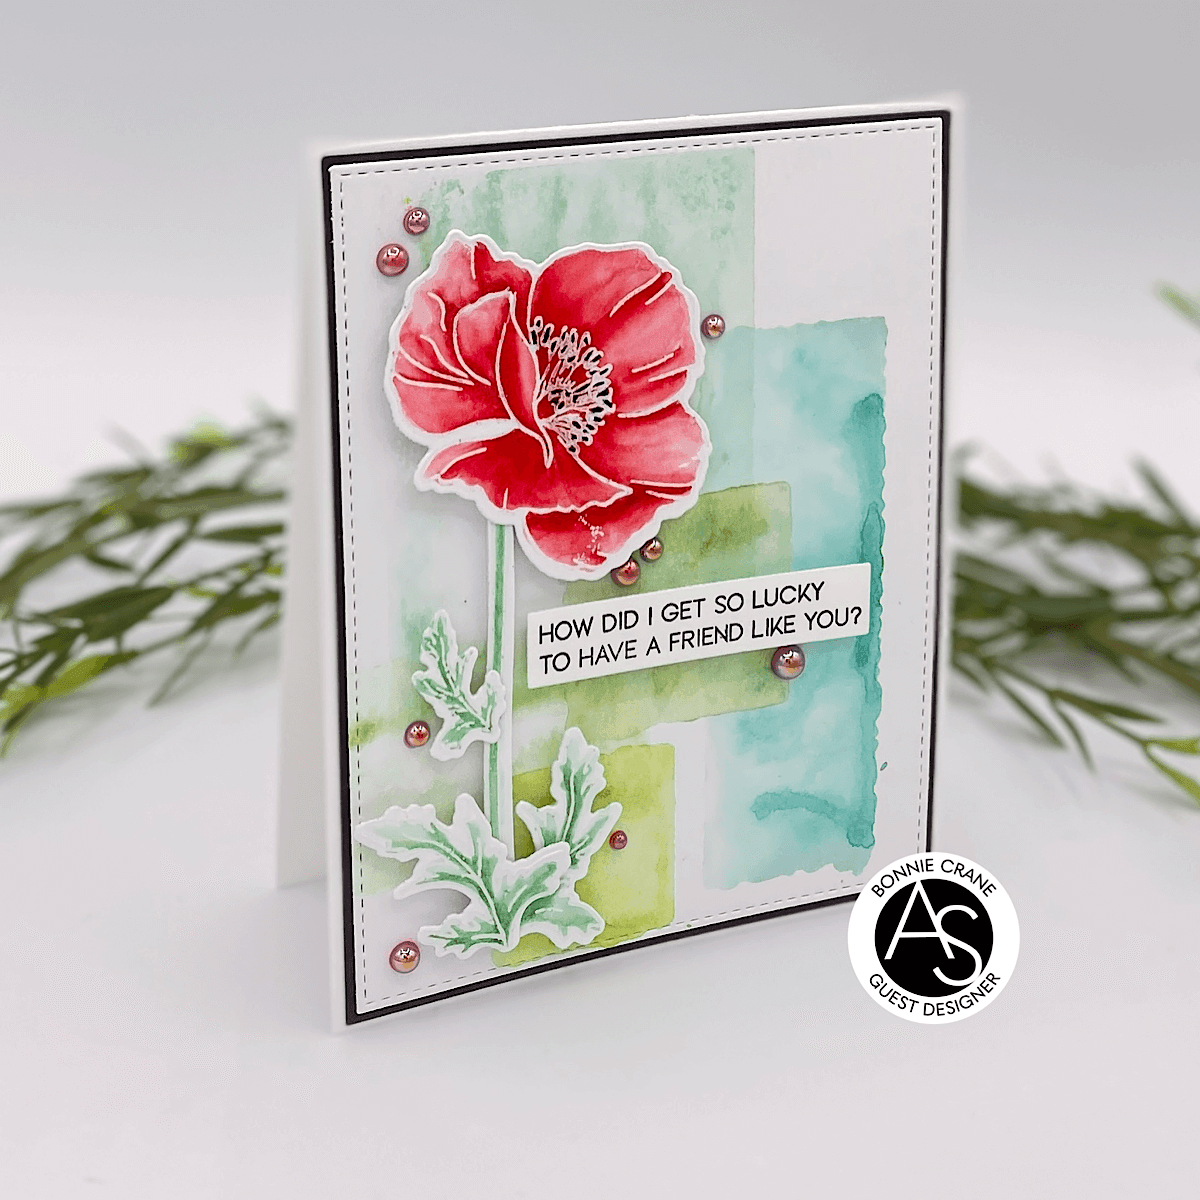 Expressing-Gratitude-Sentiments-Stamp-alex-syberia-designs-cardmaking-thankyou-cards-die-cutting-ideas-sentiments-poppies-stamp